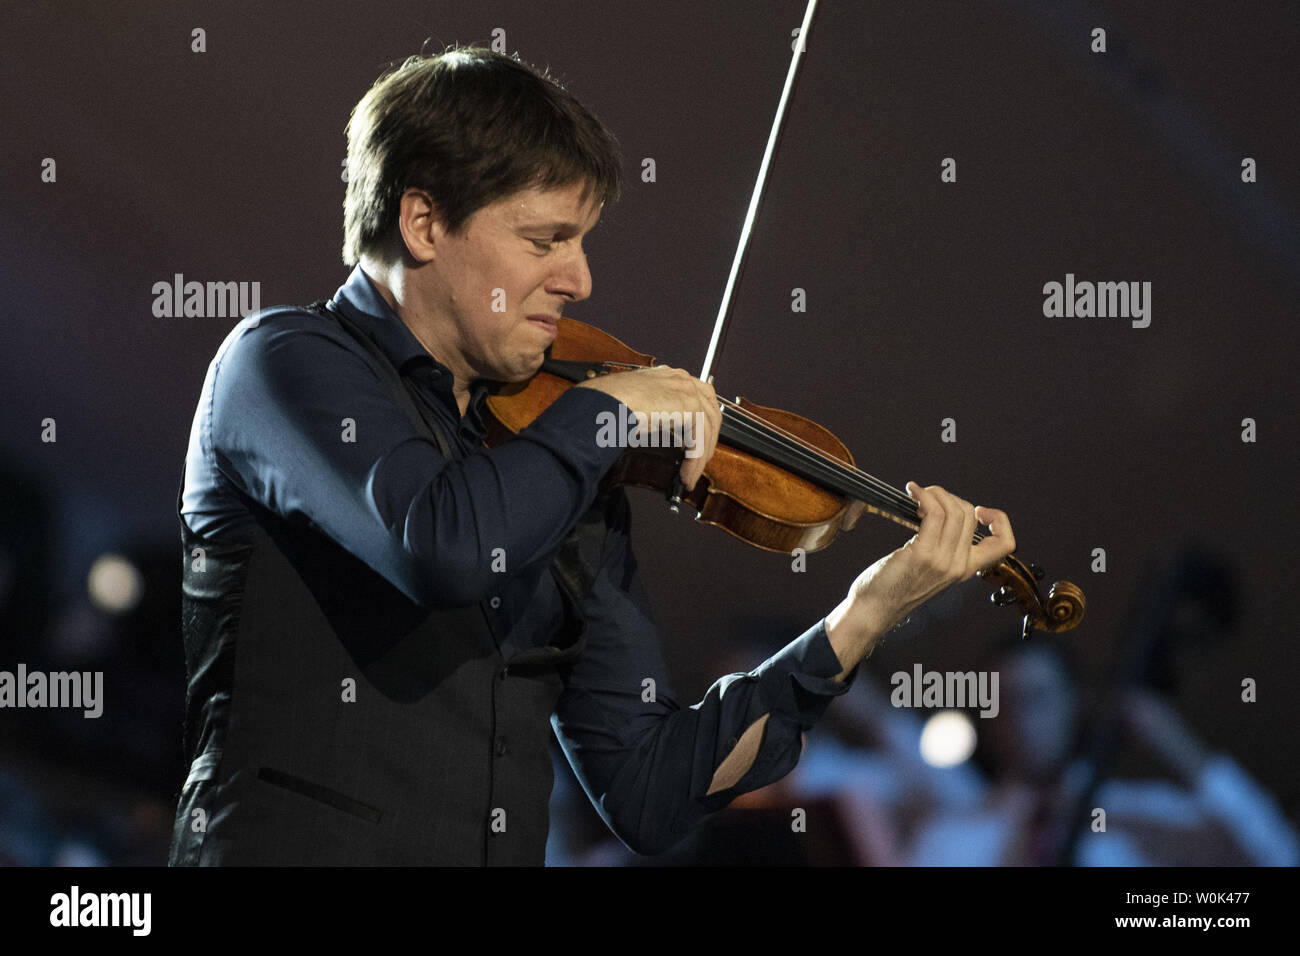 Violinist Joshua Bell performs a patriotic song during a dress rehearsal for the Capitol Fourth concert in Washington, DC on July 3, 2018.  The annual PBS TV show will be performed live with fireworks during the Fourth of July celebrations in the nation's capital on July 4, 2018.   Photo by Pat Benic Stock Photo